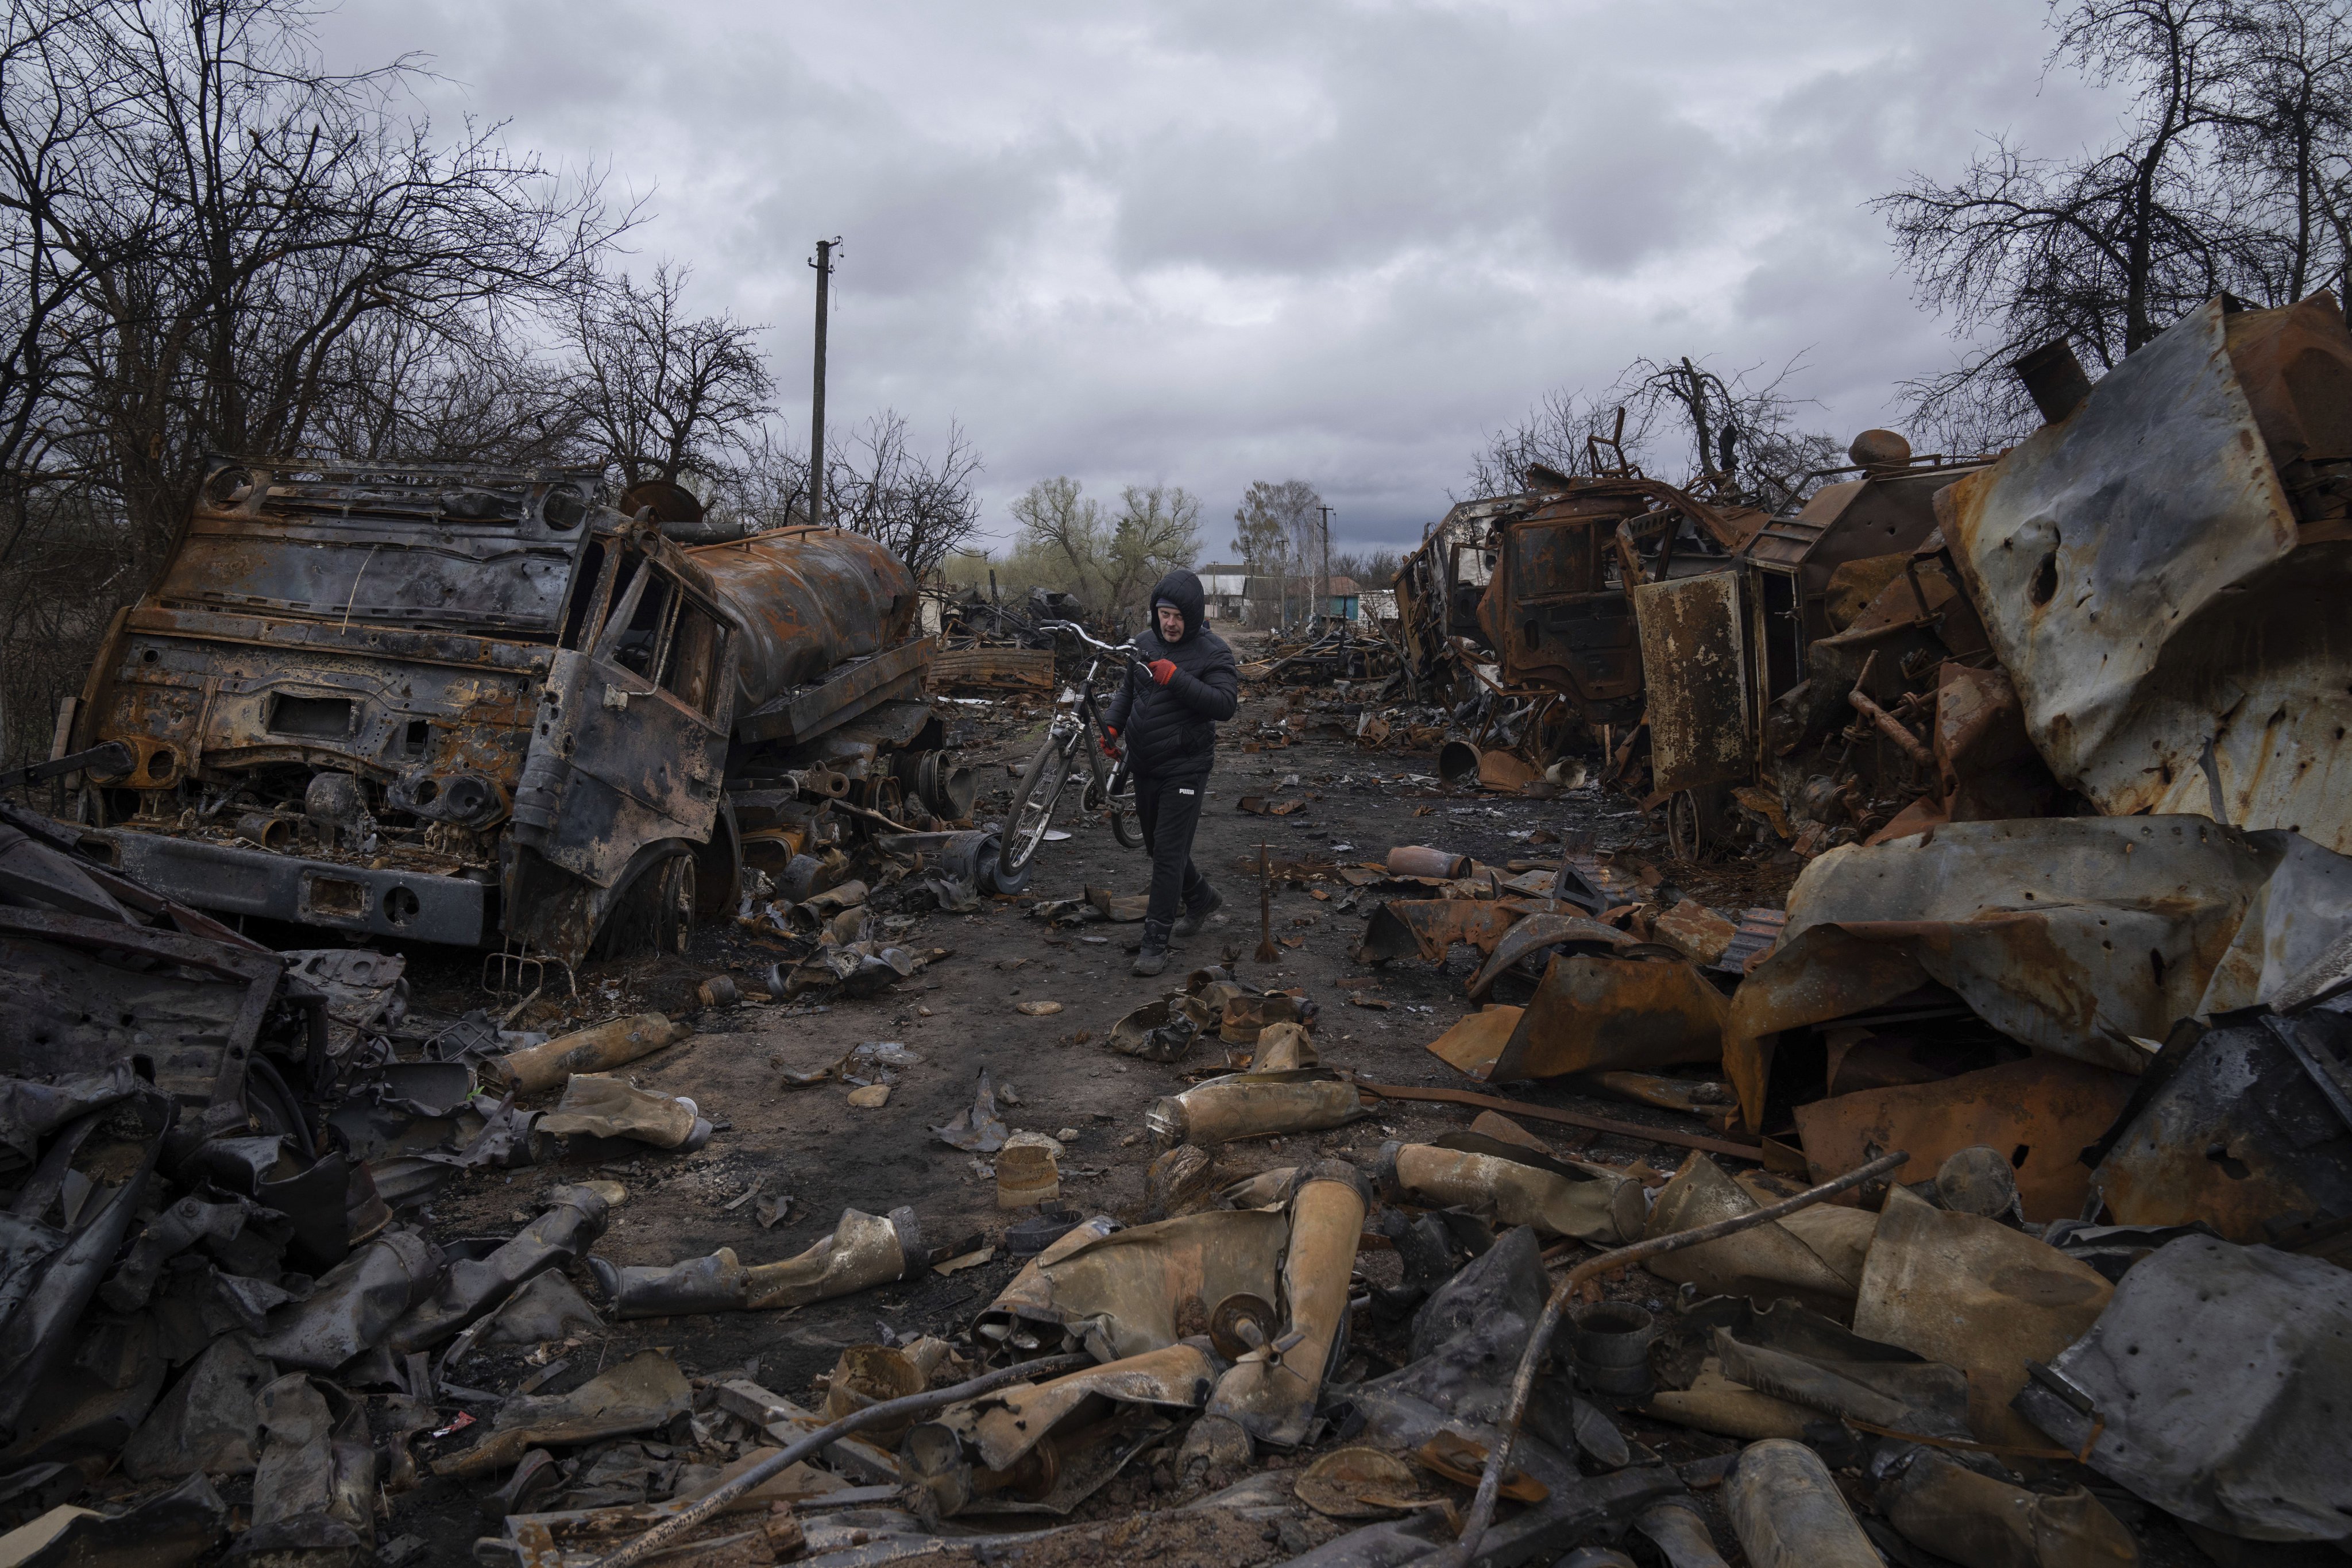 A man carries a bicycle along a street filled with destroyed Russian military vehicles near Chernihiv, Ukraine, on April 17. Photo: AP